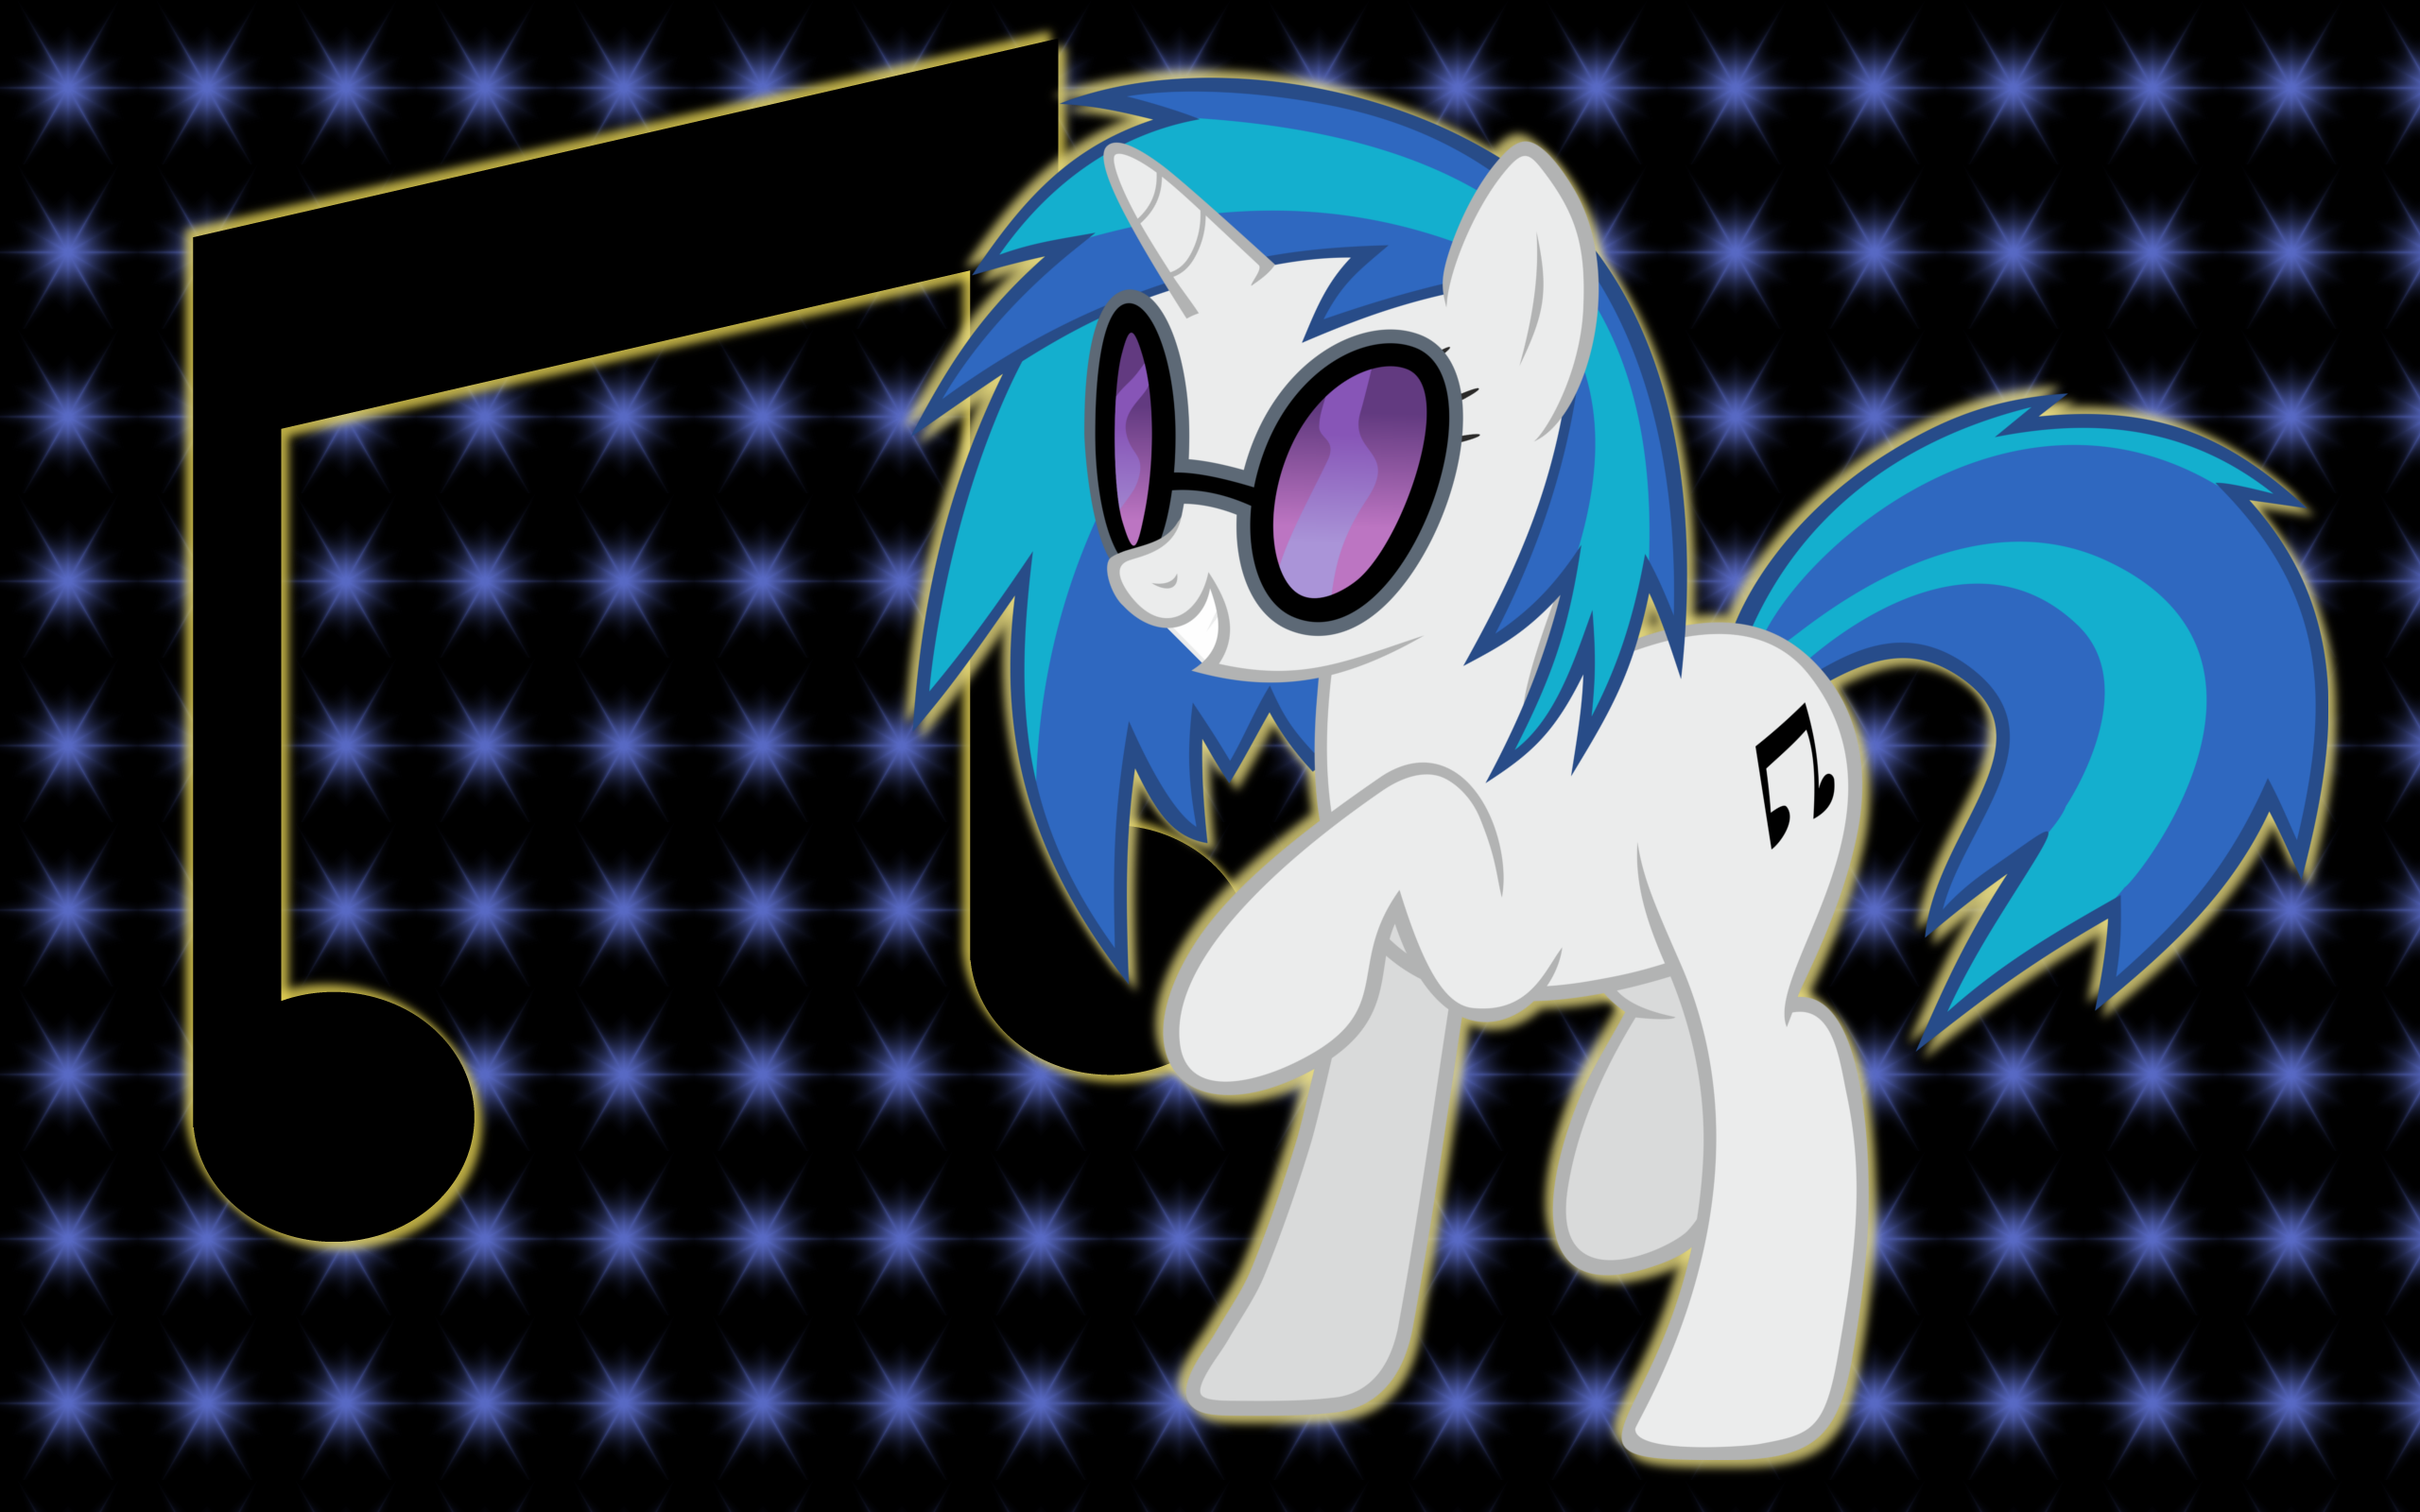 Vinyl Scratch WP 2 by AliceHumanSacrifice0, ooklah and StardustXIII